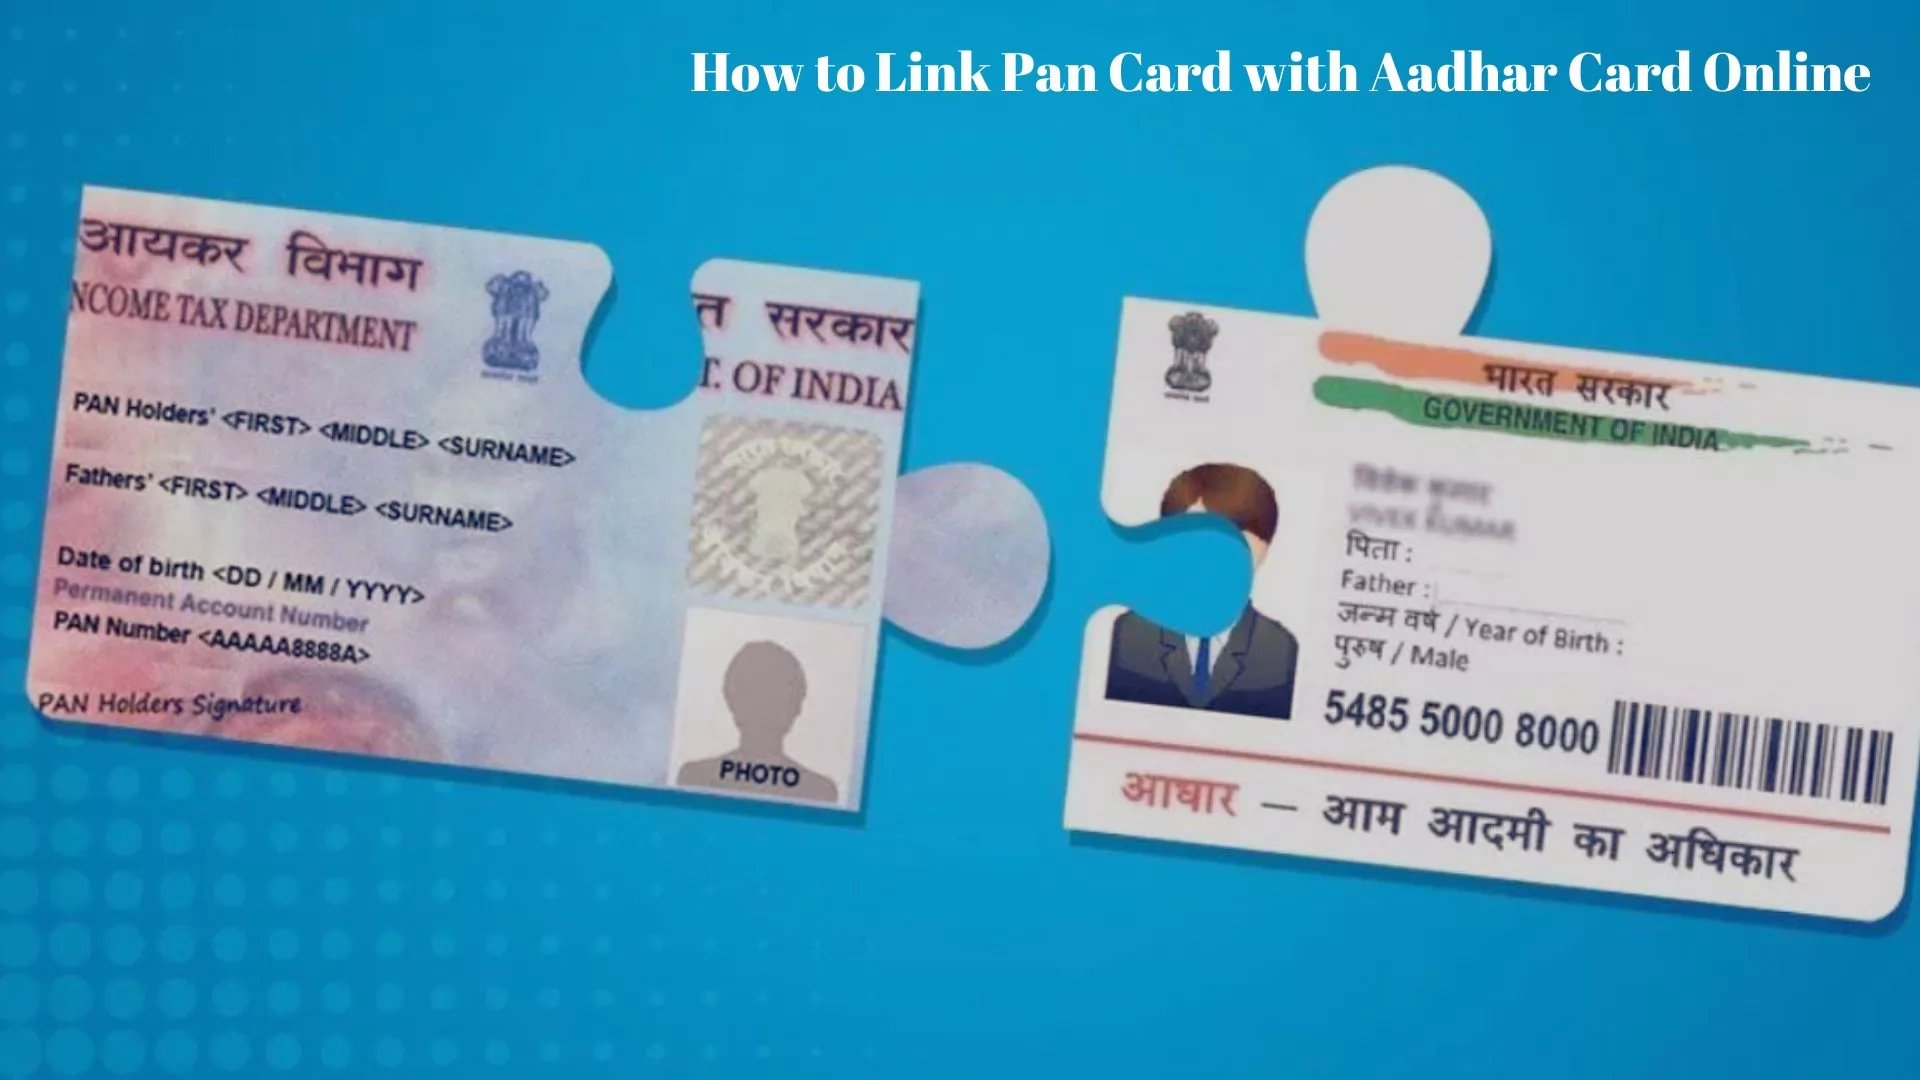 How to link Pan Card with Aadhar Card online